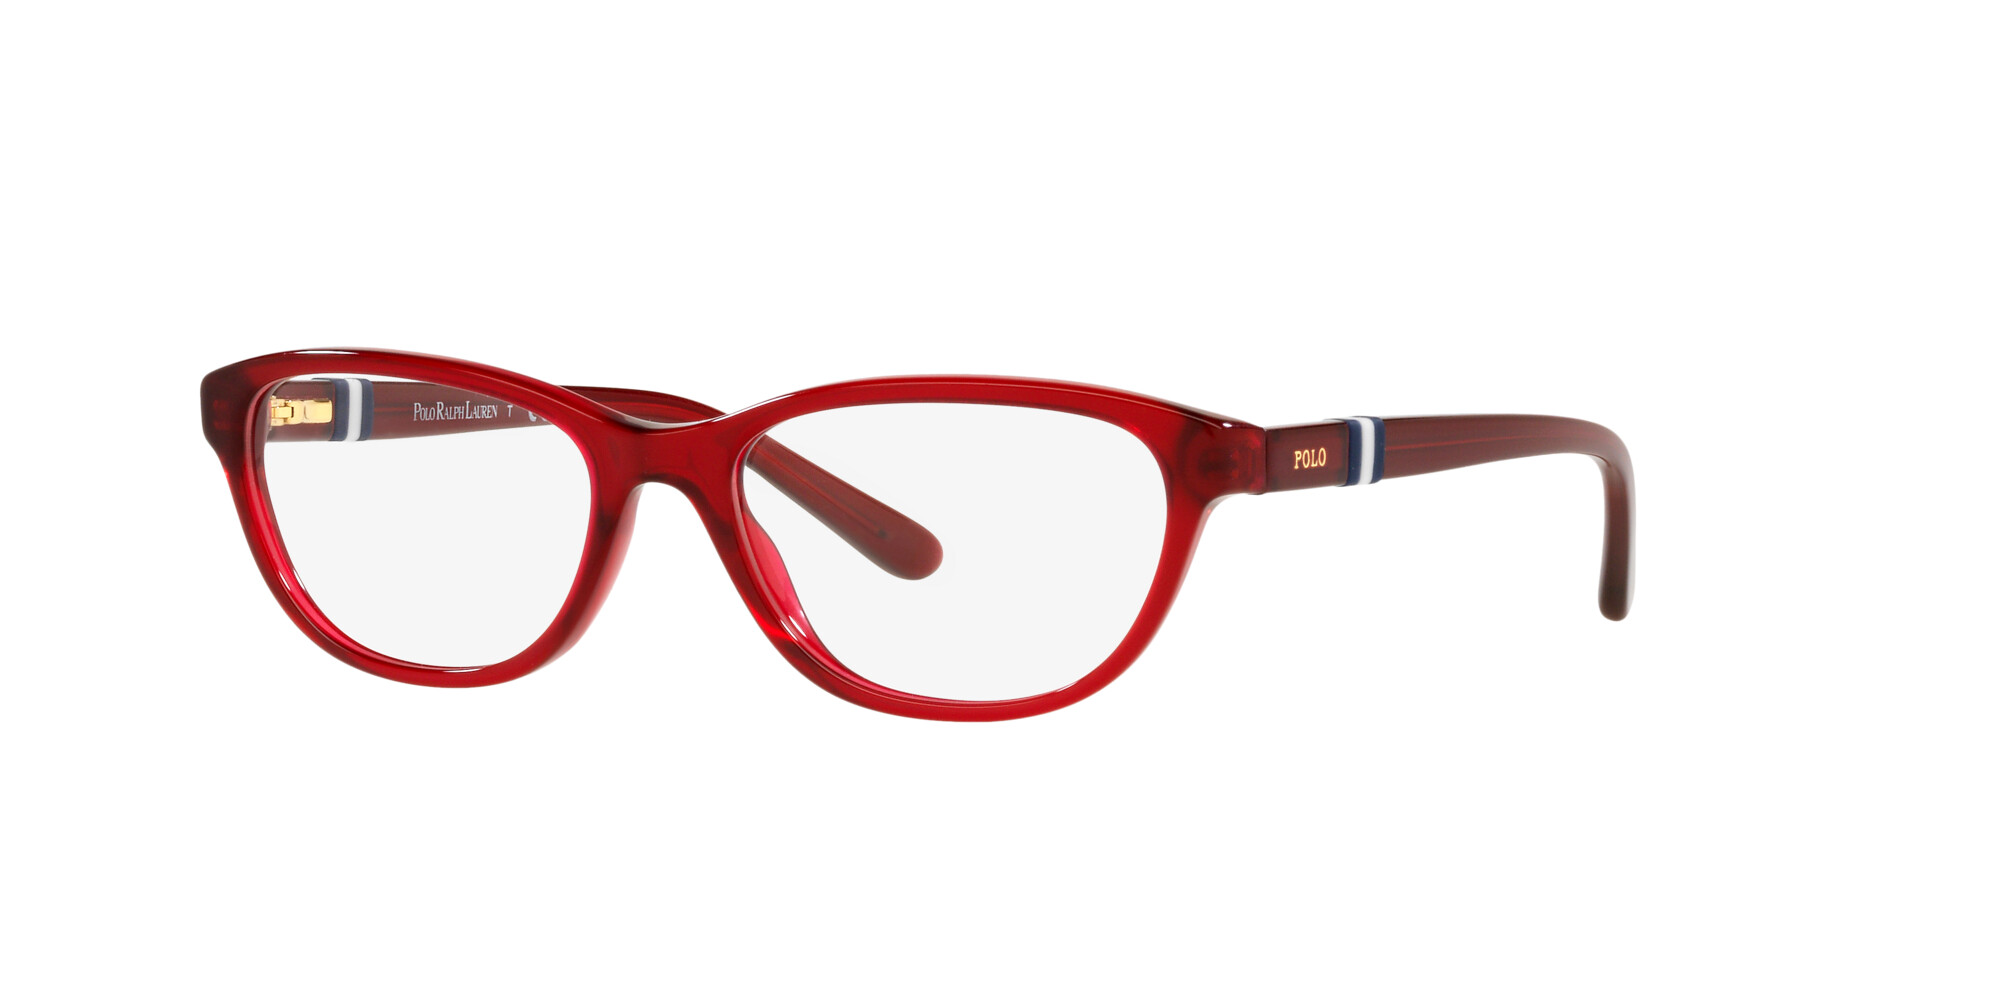 Angle_Left01 PoloPrep 0PP8542 5458 Brille Rot